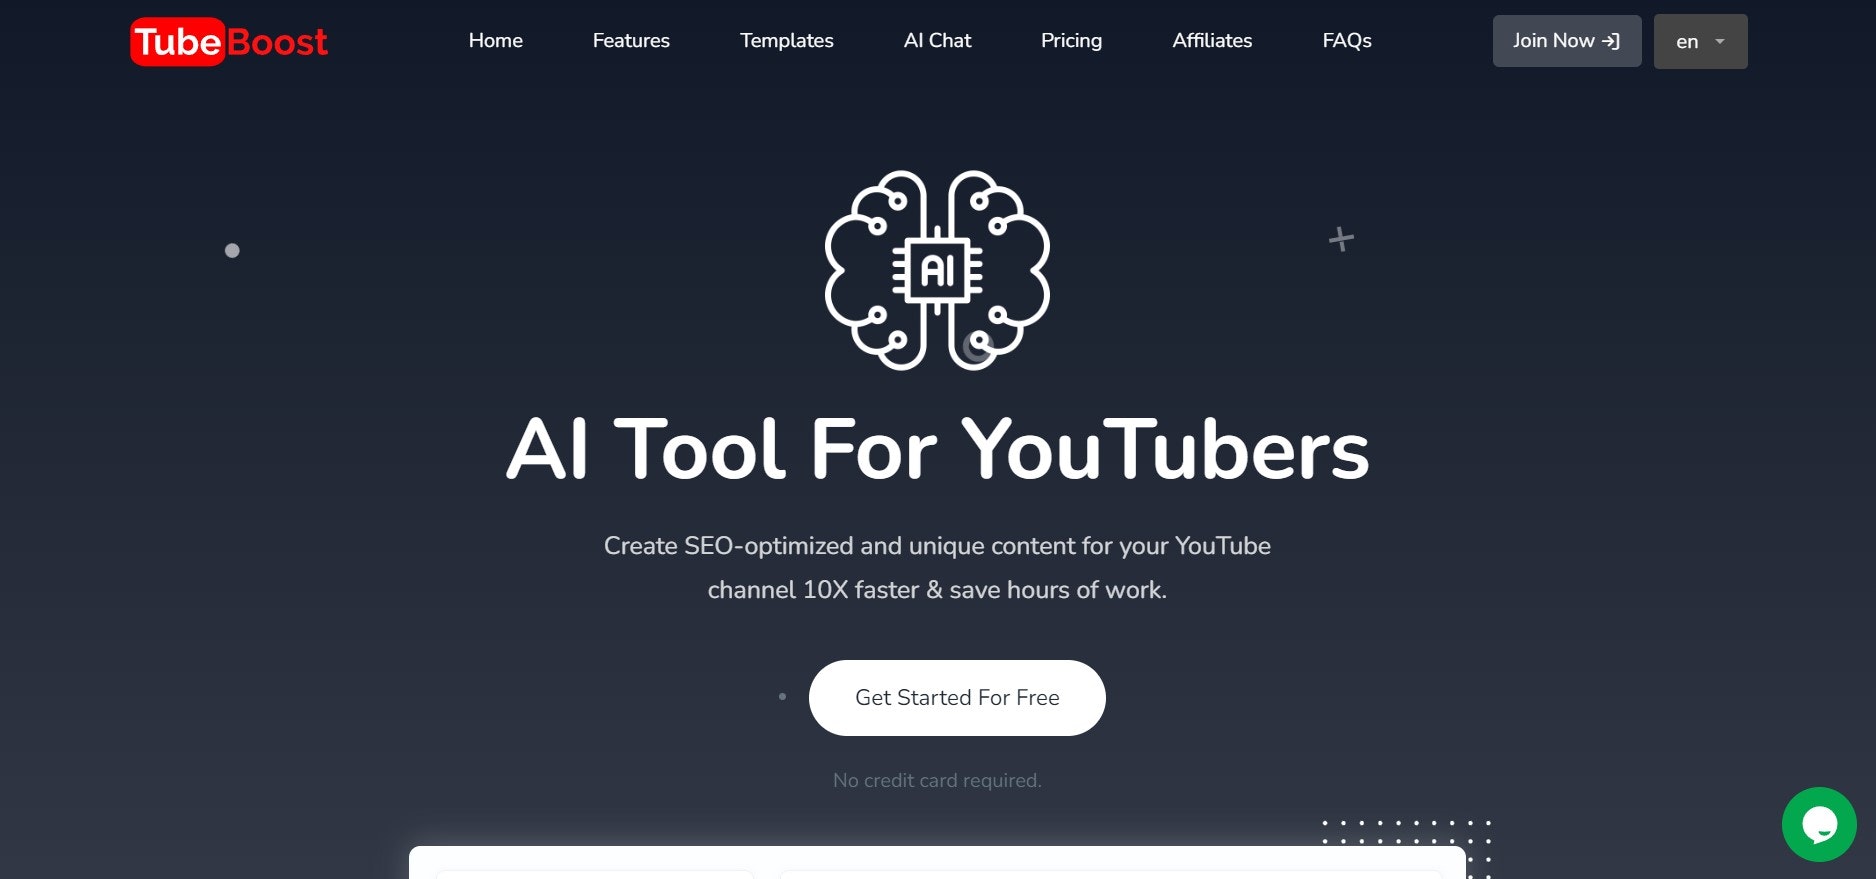 startuptile TubeBoost-AI Tool For YouTubers